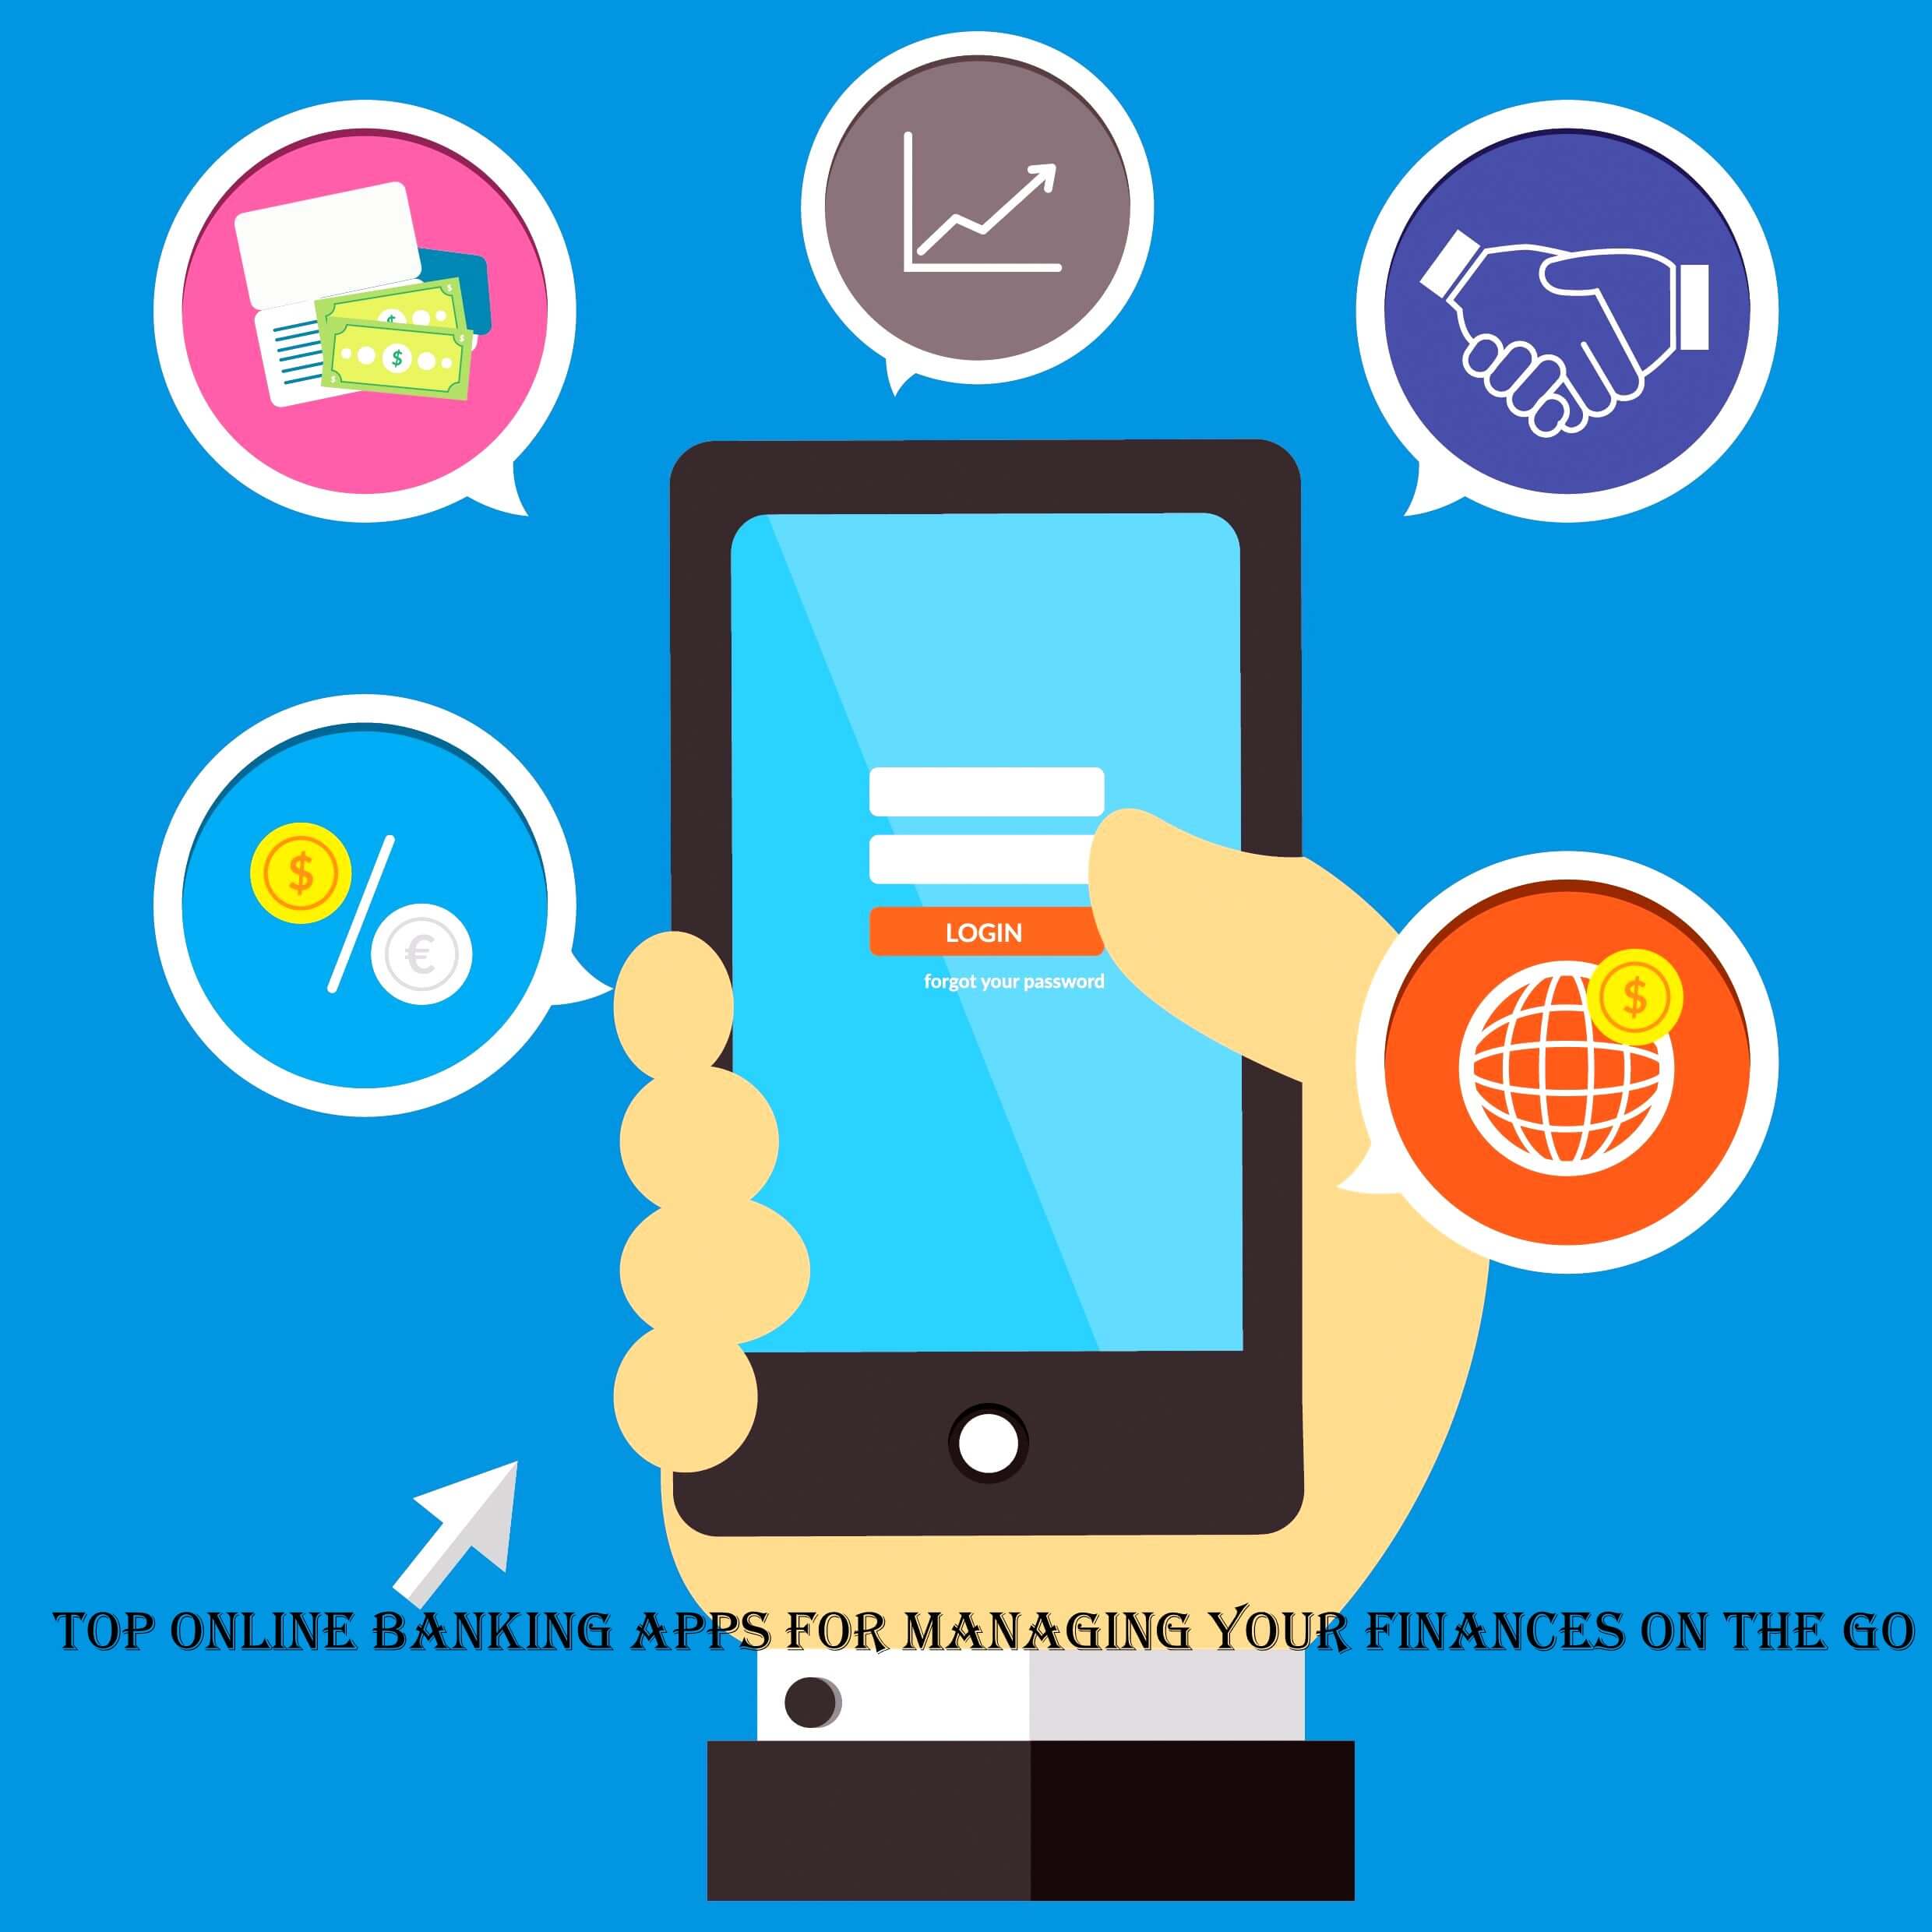 Top Online Banking Apps for Managing Your Finances on the Go